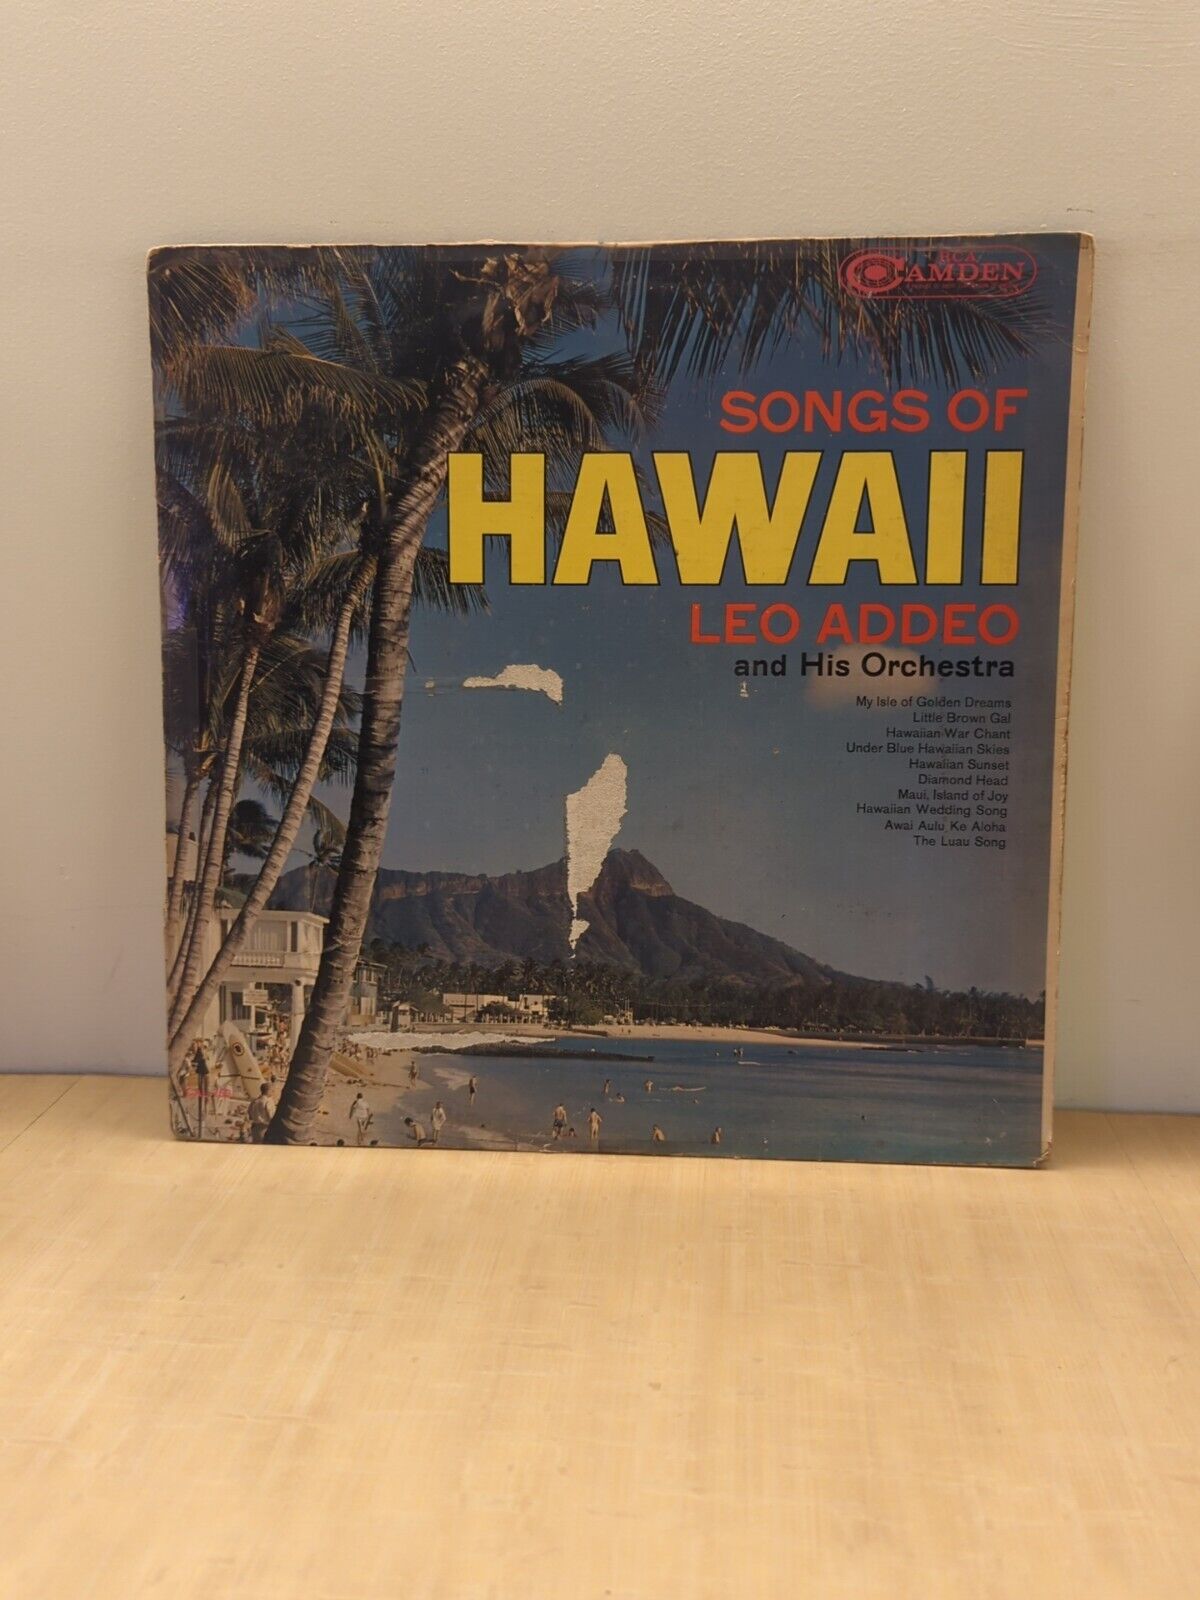 Leo Addeo And His Orchestra – Songs Of Hawaii - VINYL RECORD LP